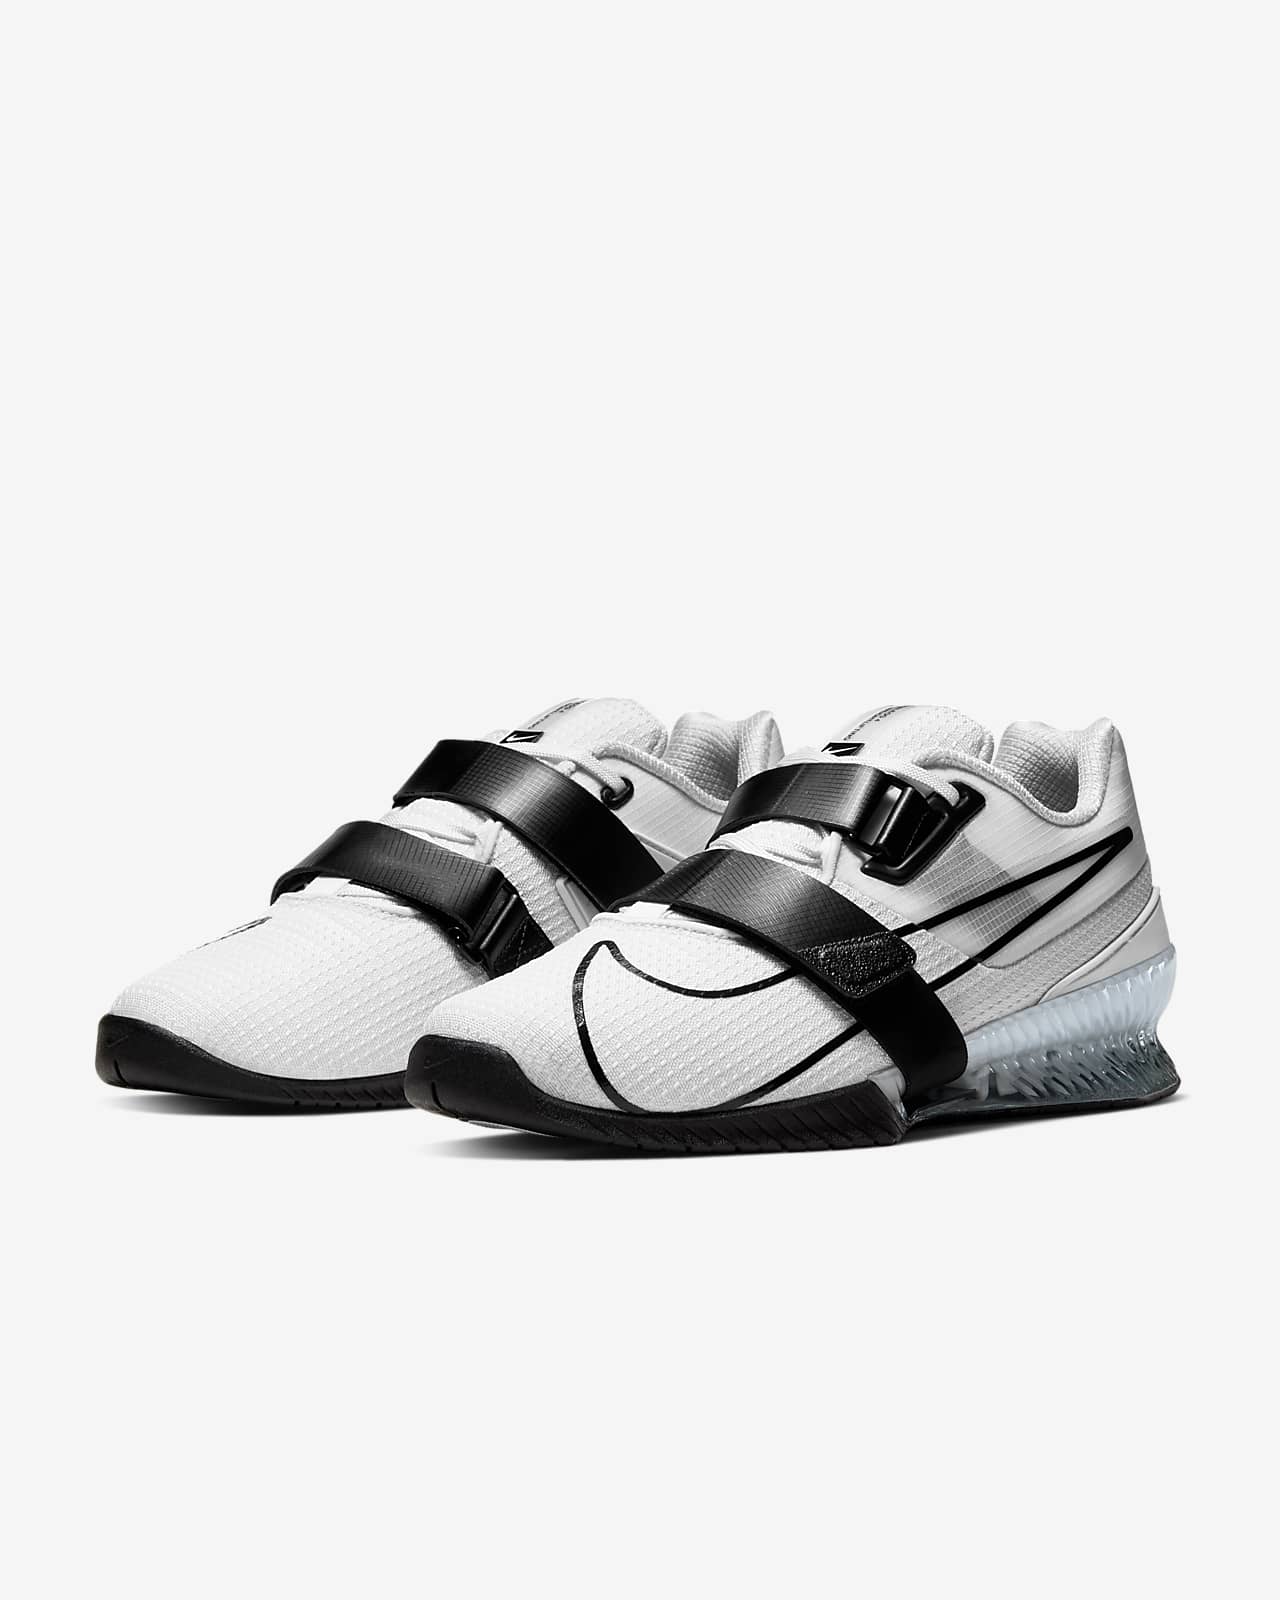 nike weightlifting shoes romaleos 4